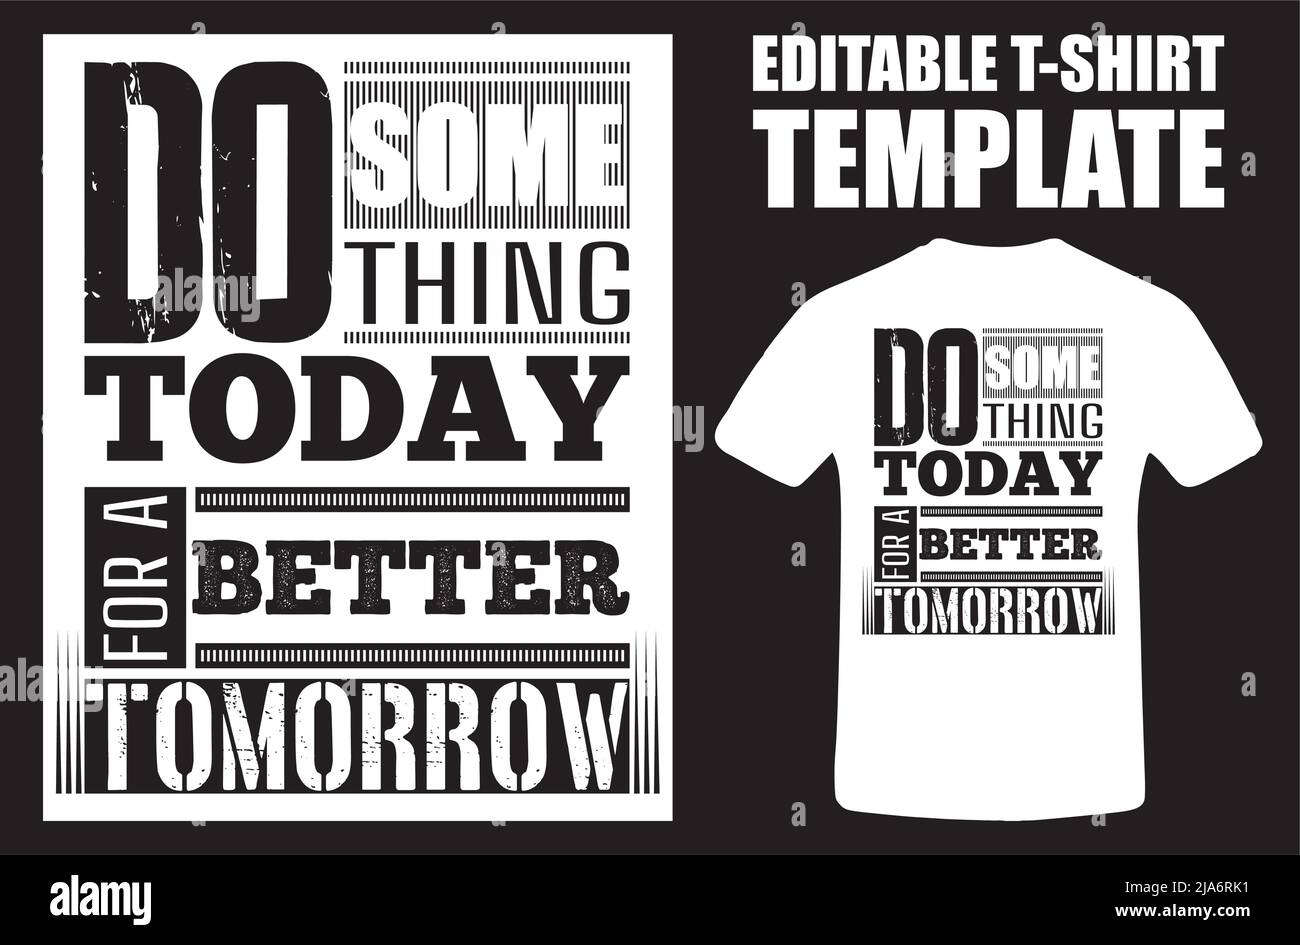 Do Something Today For A Better Tomorrow. Do Something Today Modern Typography Quote Grey T Shirt Design. Vector Illustration Design For T Shirt Graph Stock Vector